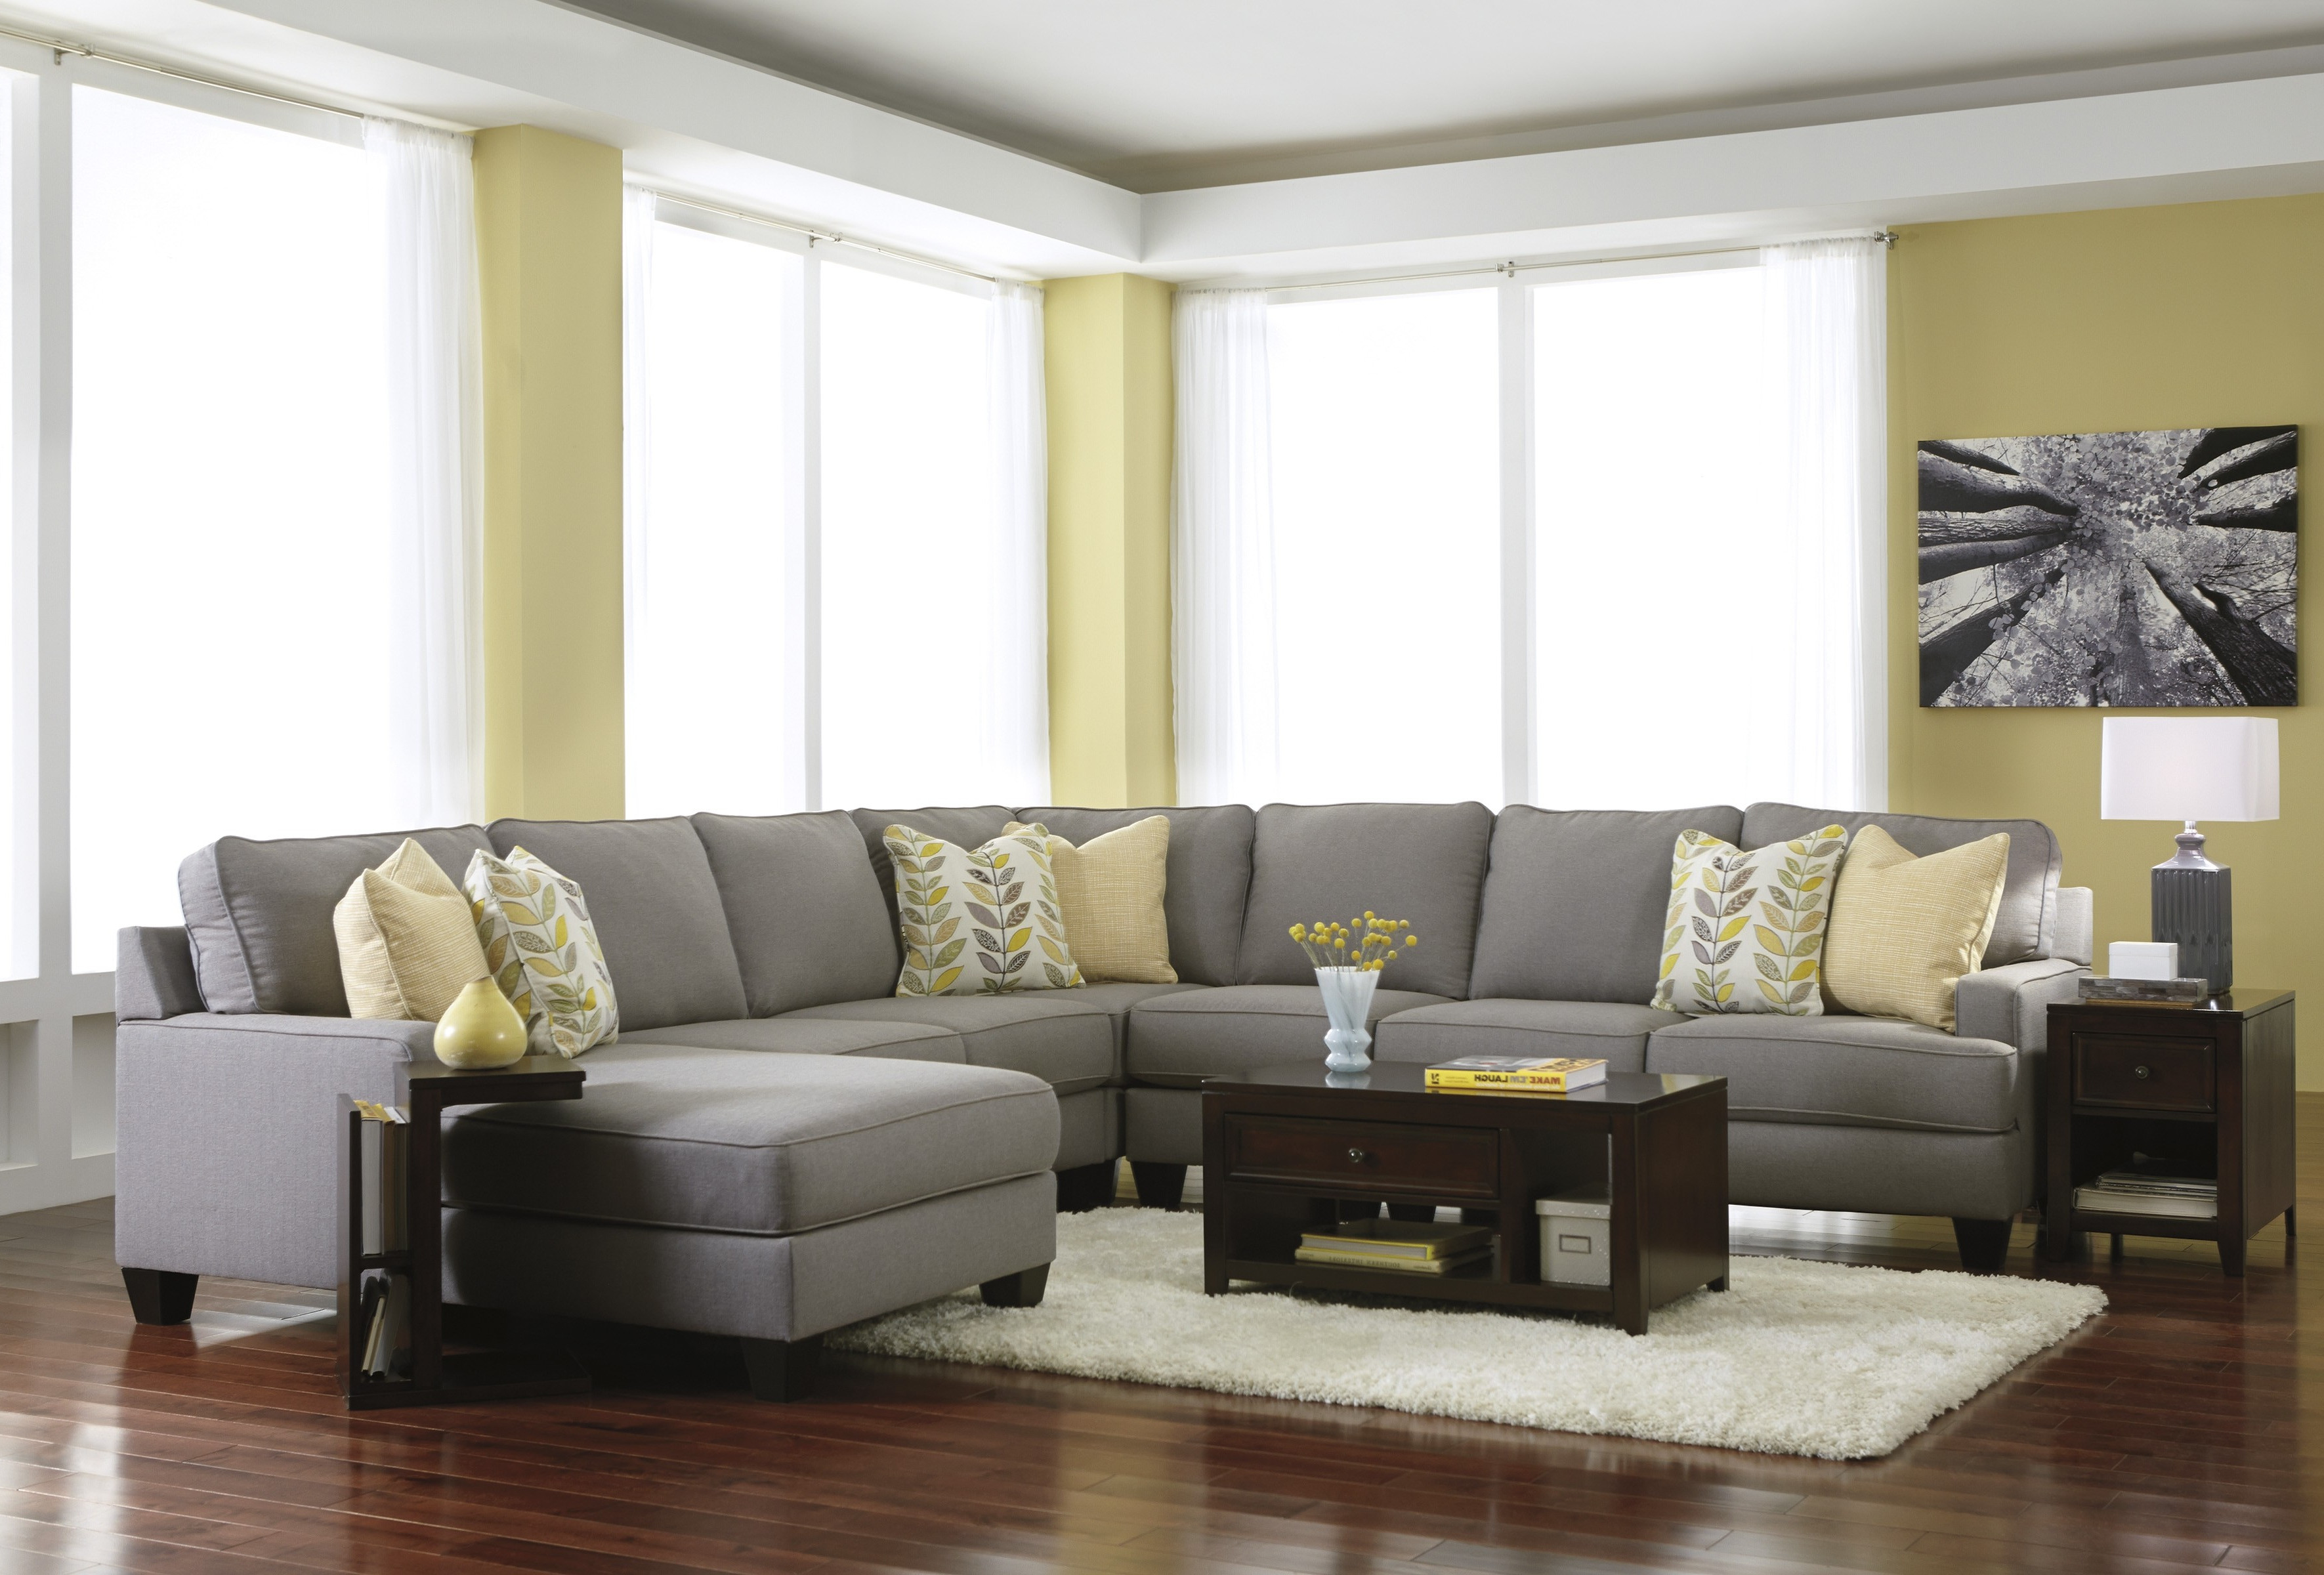 modern living room ideas decorating with grey fabric sectionals sofa and black wooden coffee table